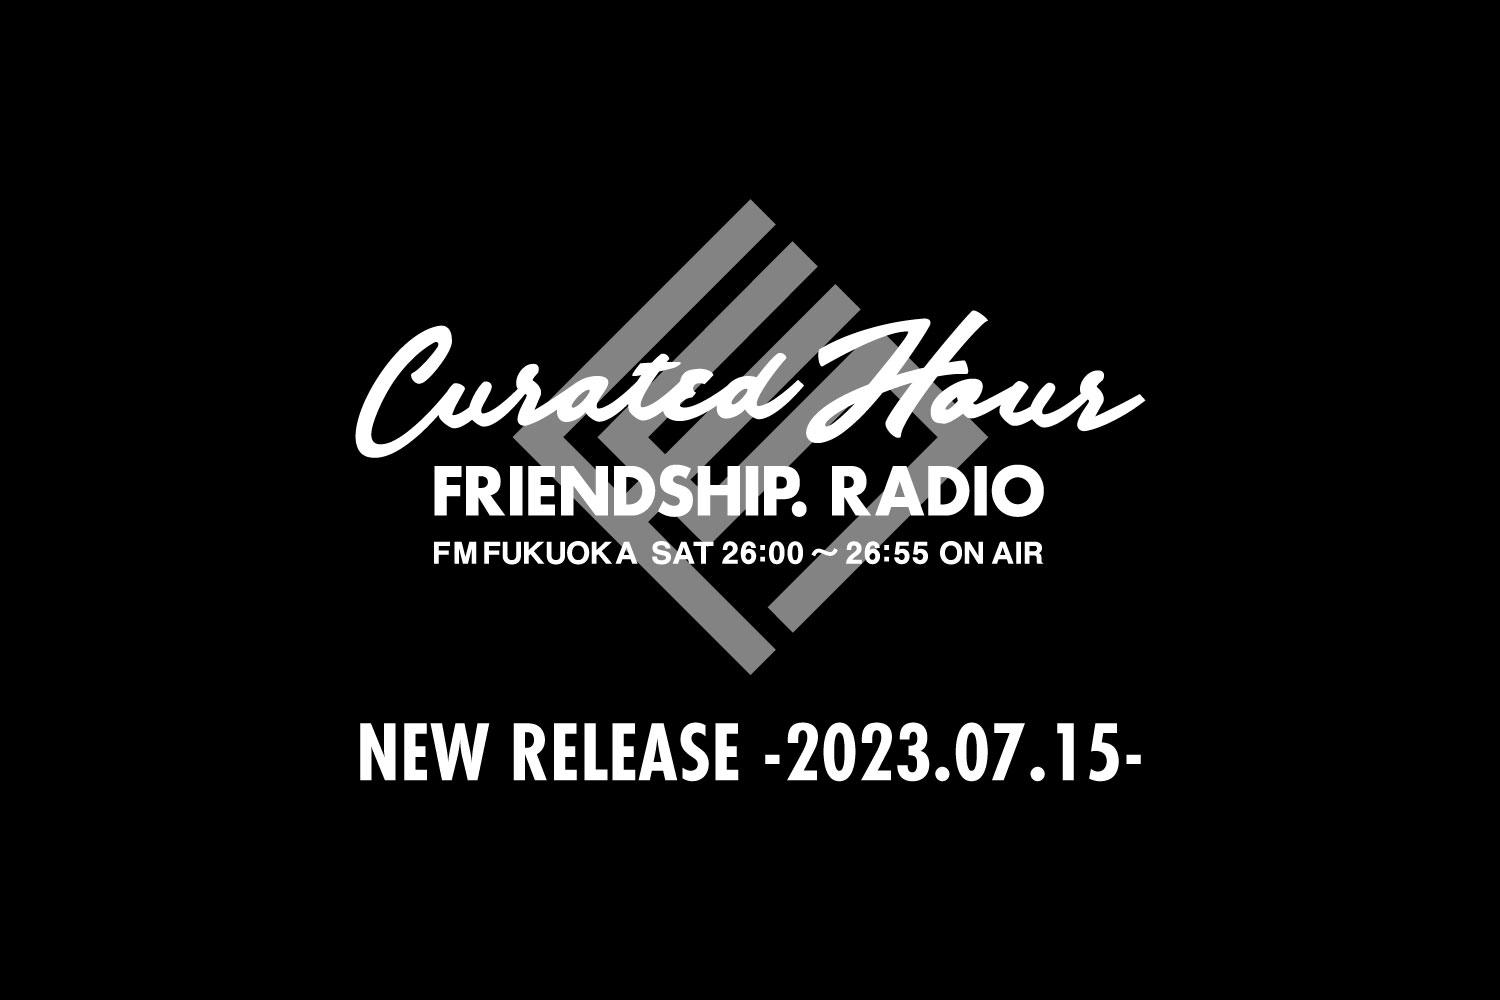 FRIENDSHIP.の最新楽曲を紹介！生活は忘れて・Limited Express(has gone?)ほか全13作品 -2023.07.15-